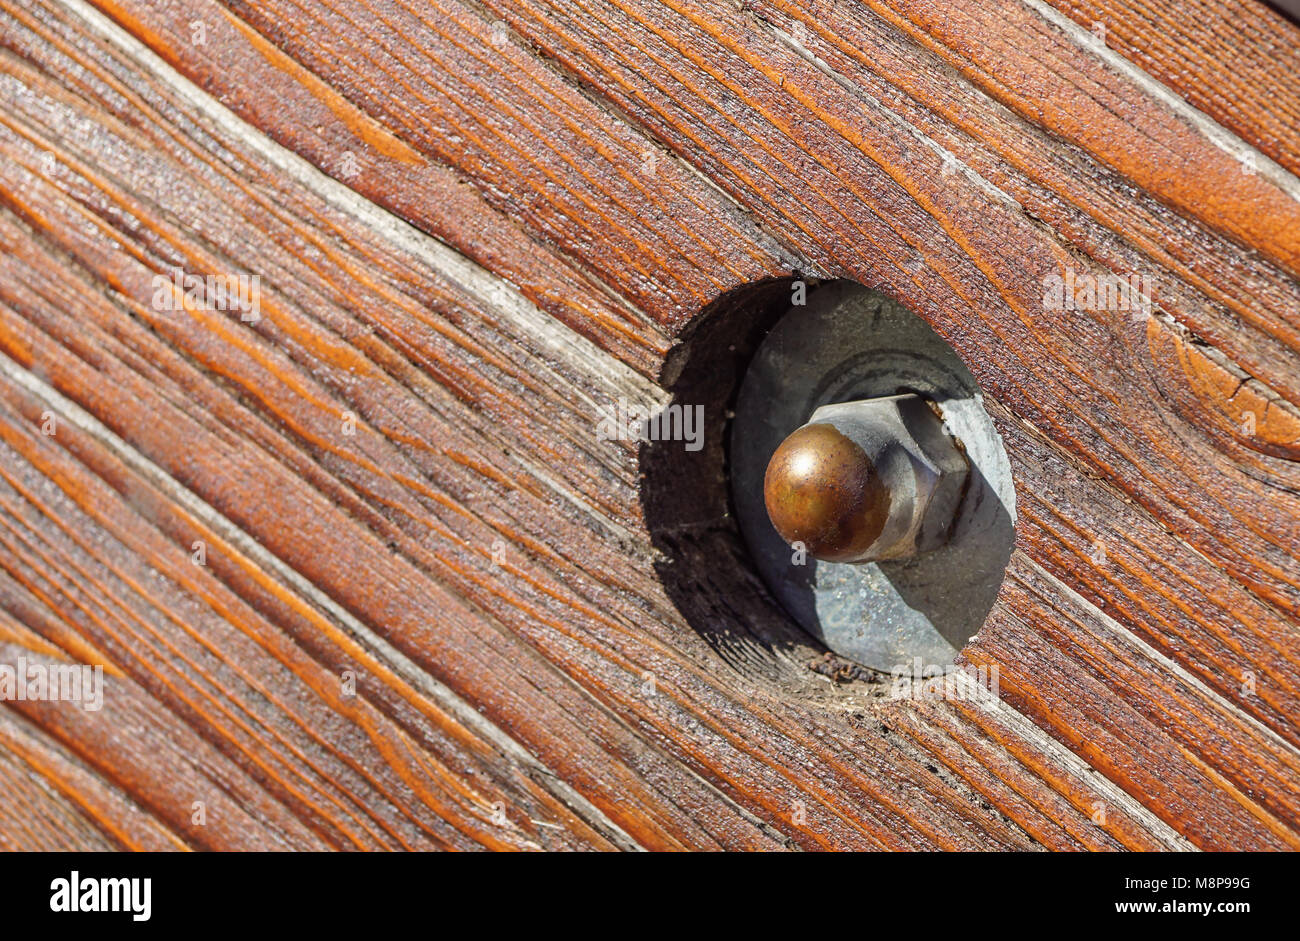 close up of old rusty screw head on rustic wooden beam Stock Photo